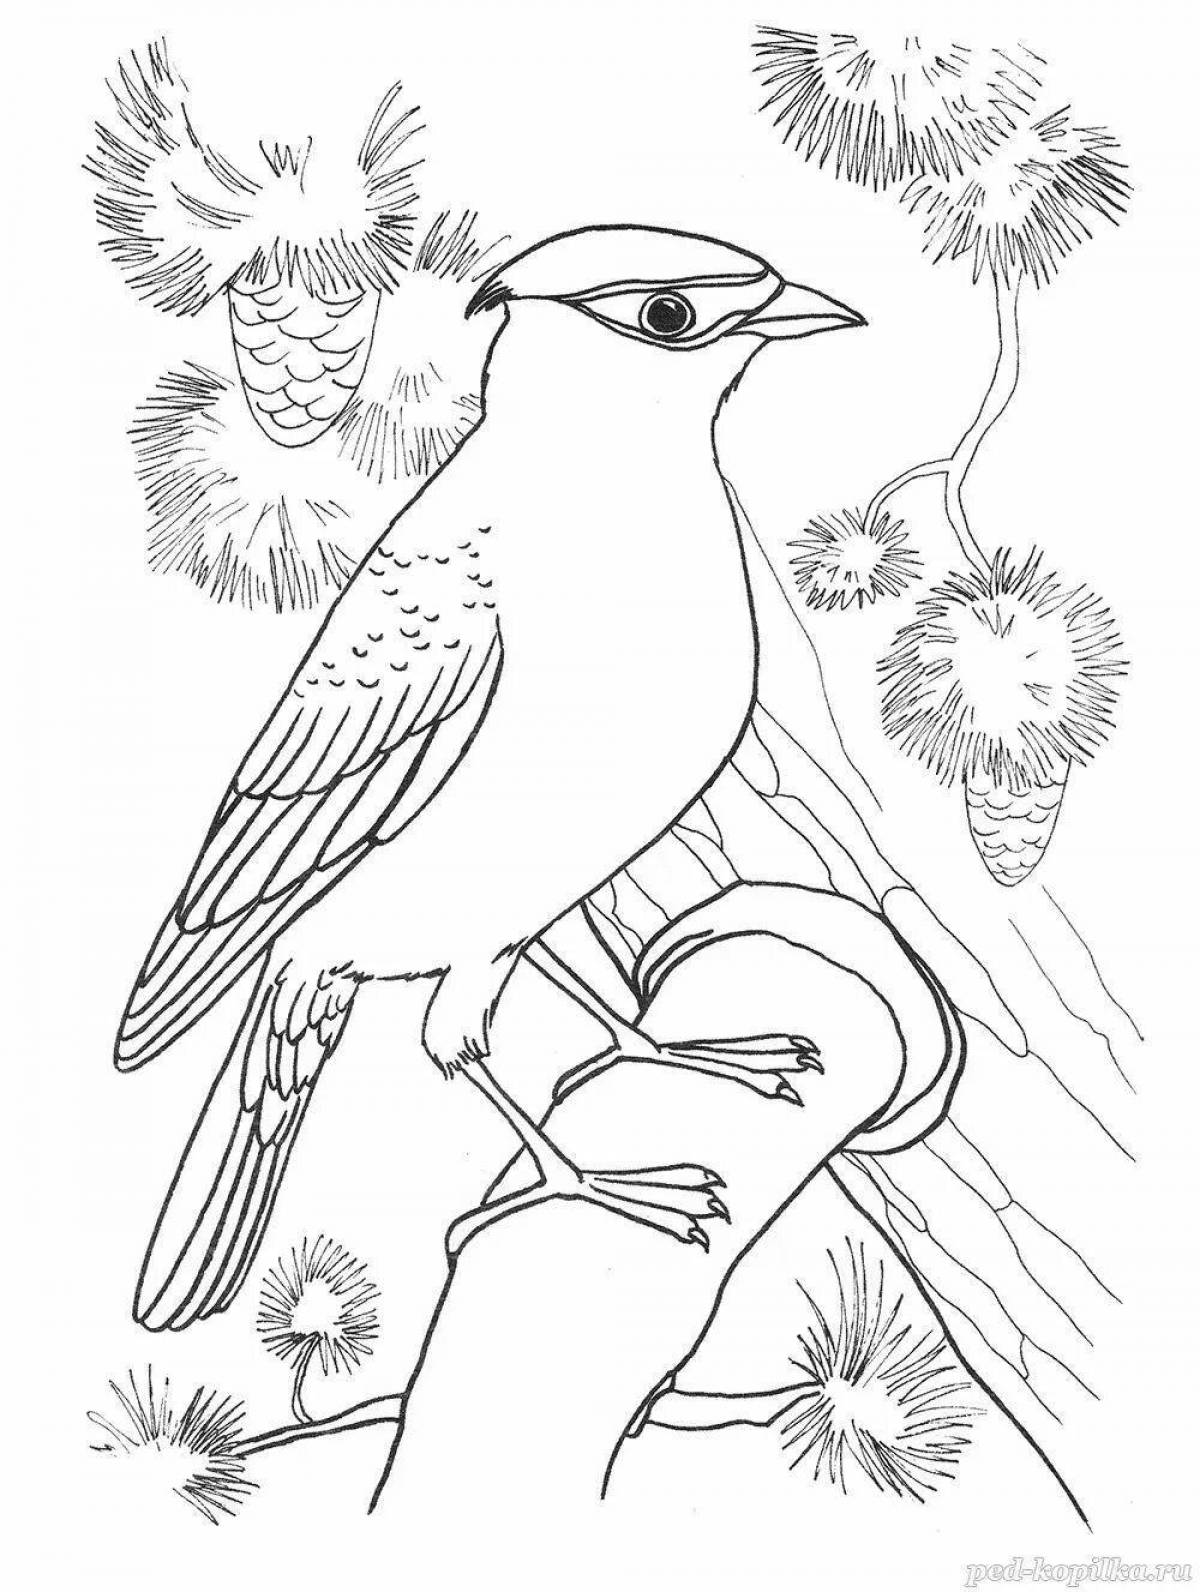 Attractively colored waxwing coloring page